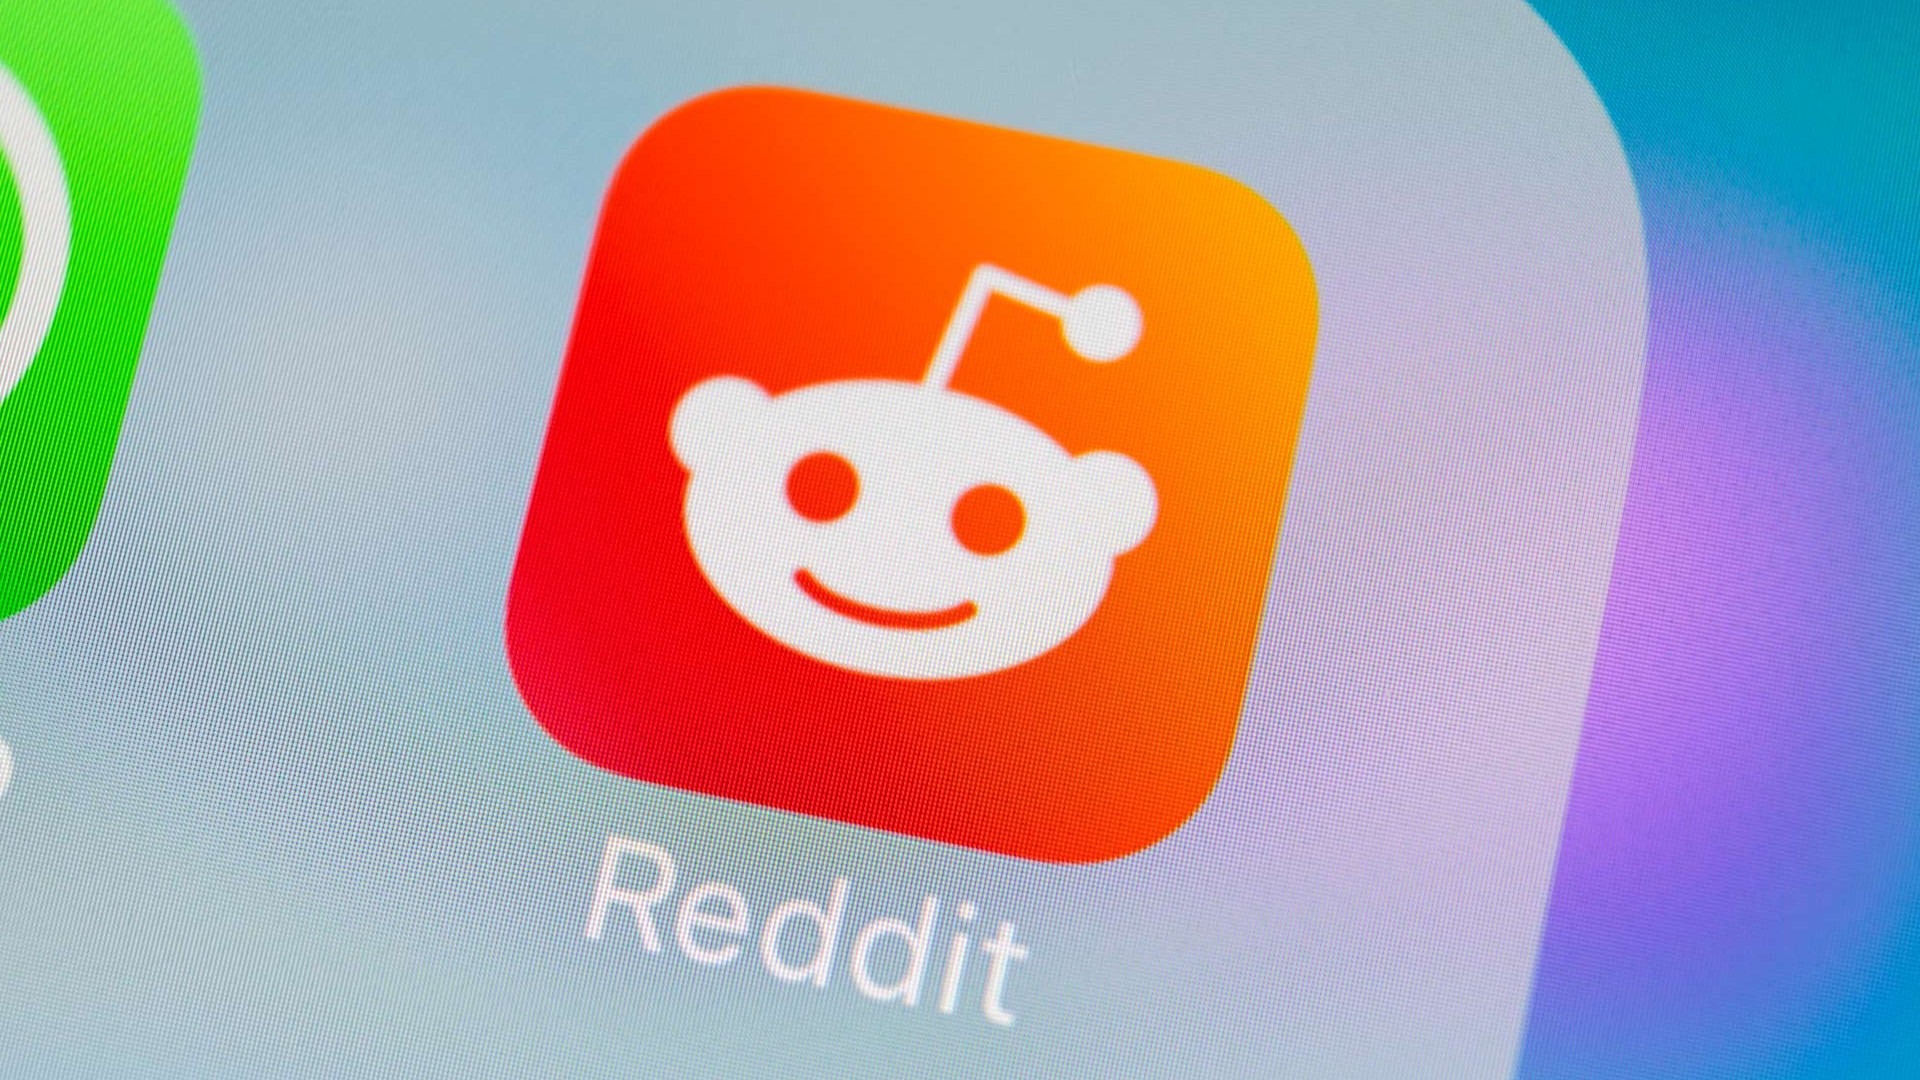 Reddit Rolls Out Feed Identical to TikTok That Stacks Videos From Subreddits You Follow